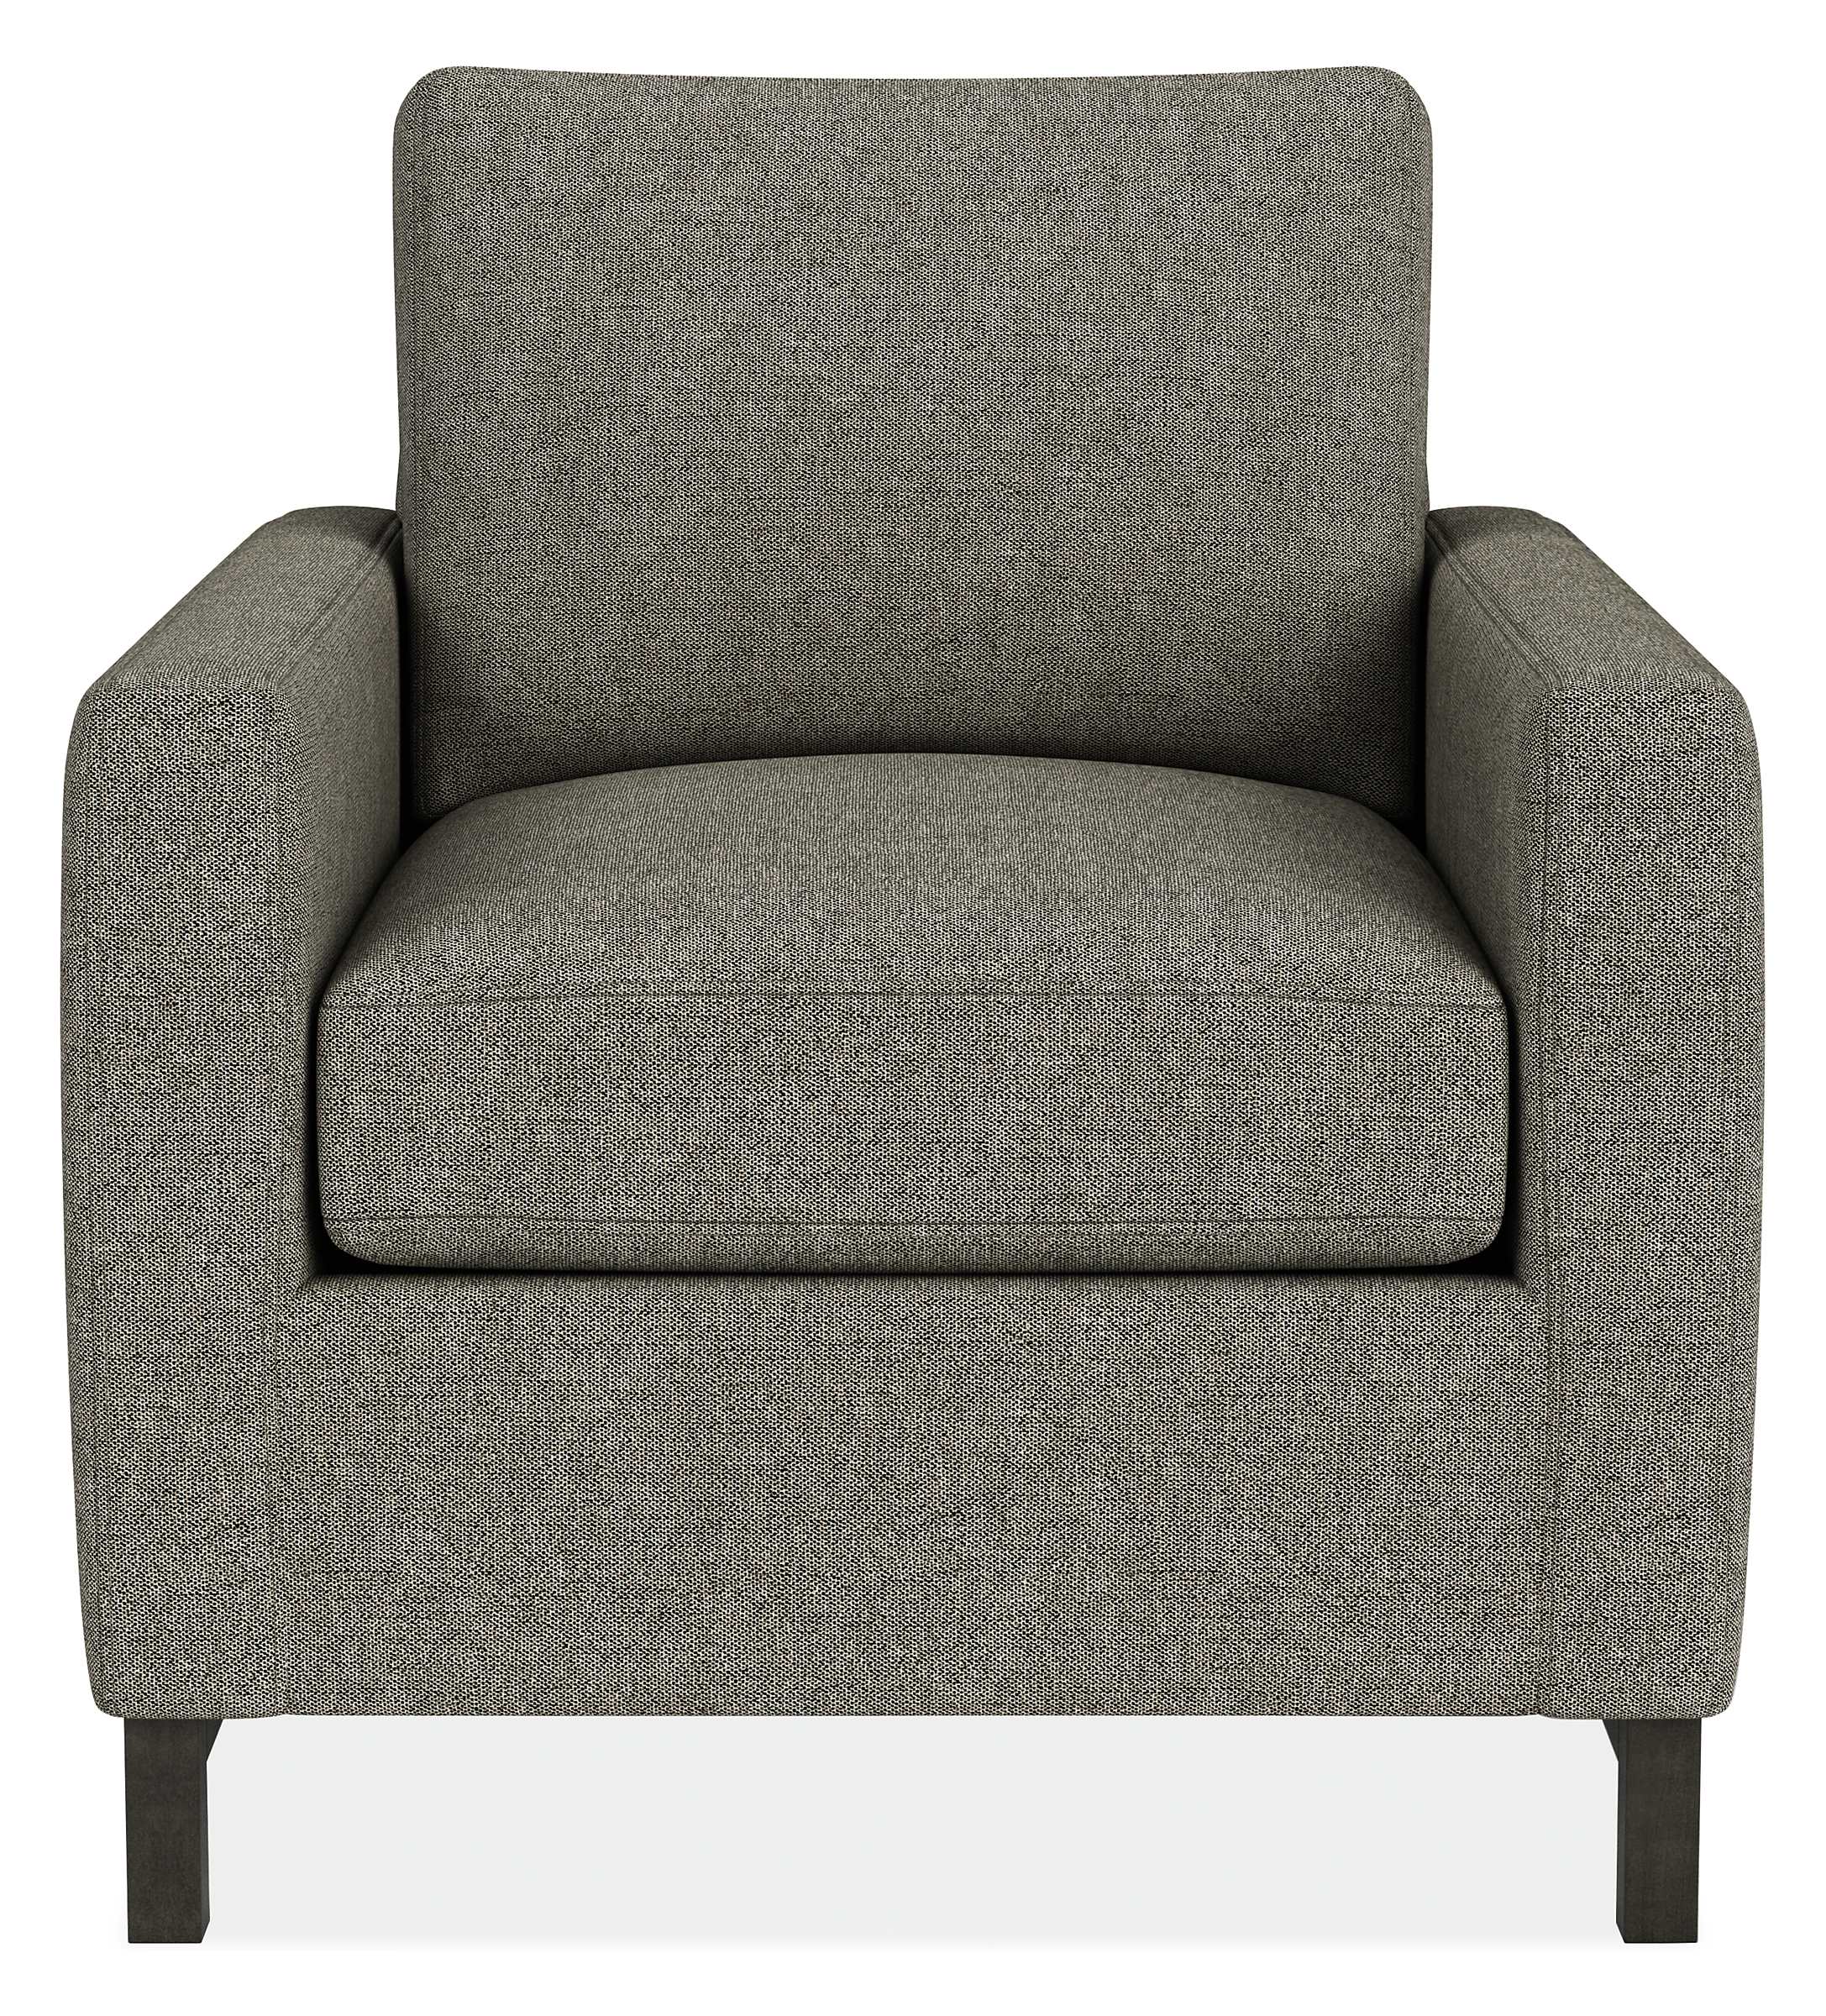 Front view of Stevens 32 Chair in Tepic Fabric.